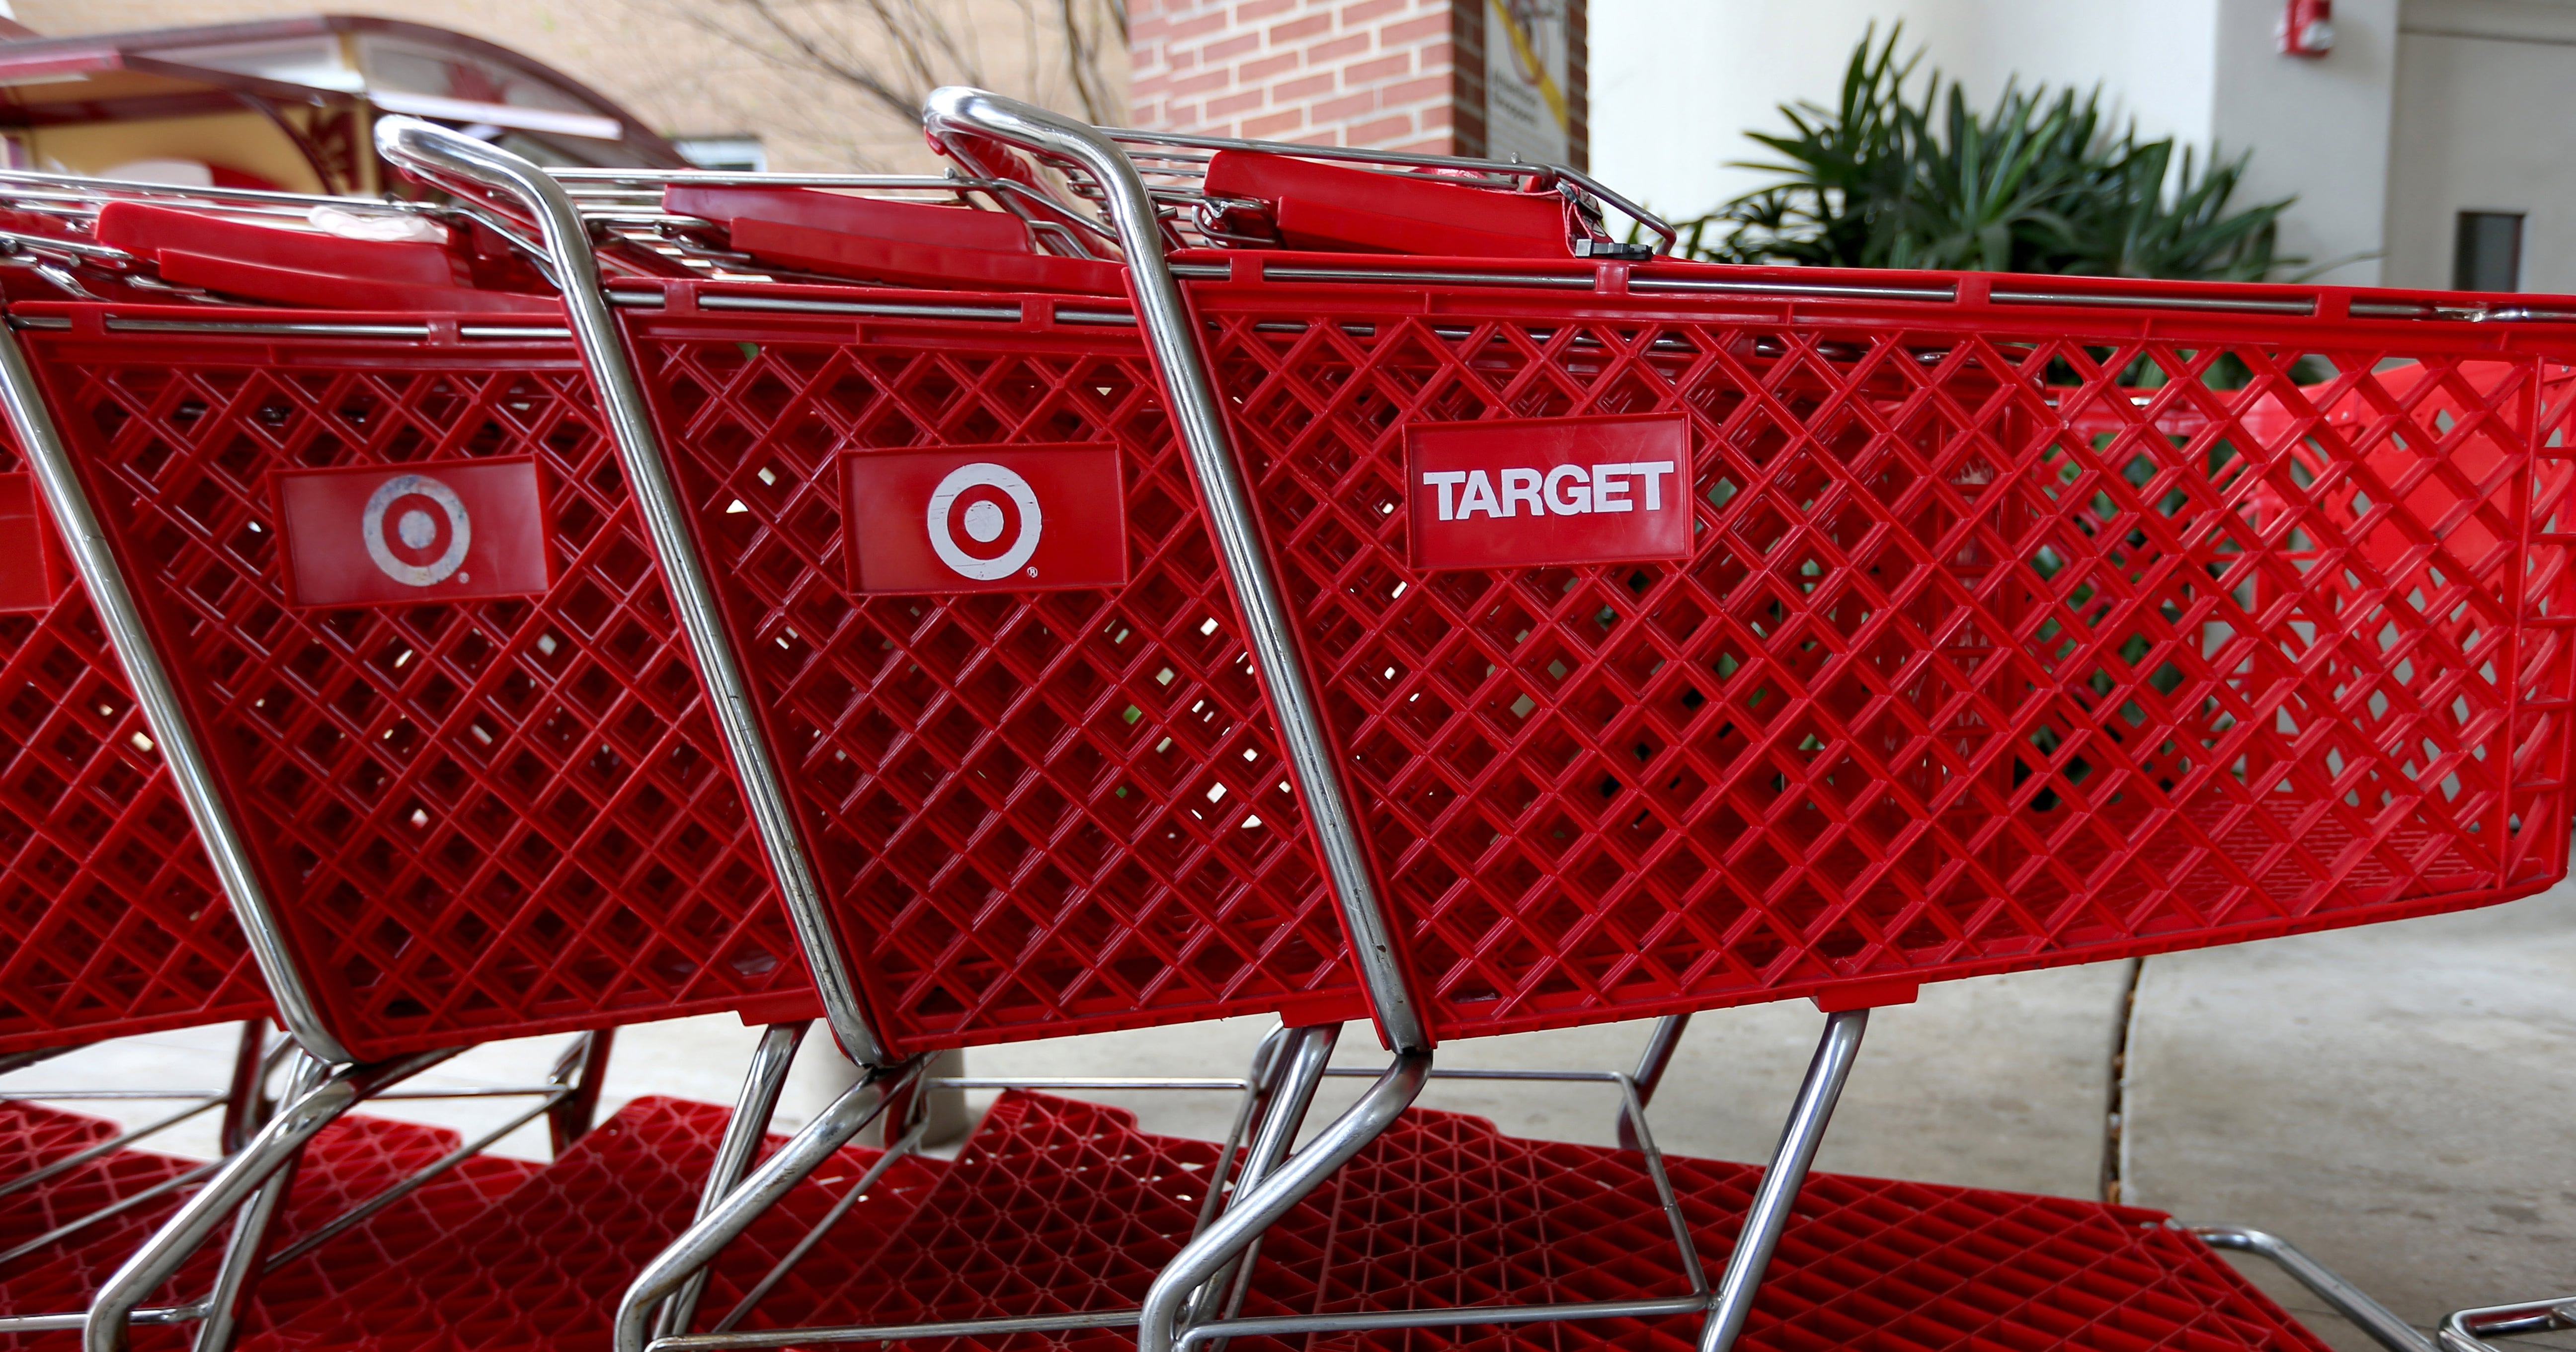 Free Target Gift Card With SPF Purchase | POPSUGAR Beauty